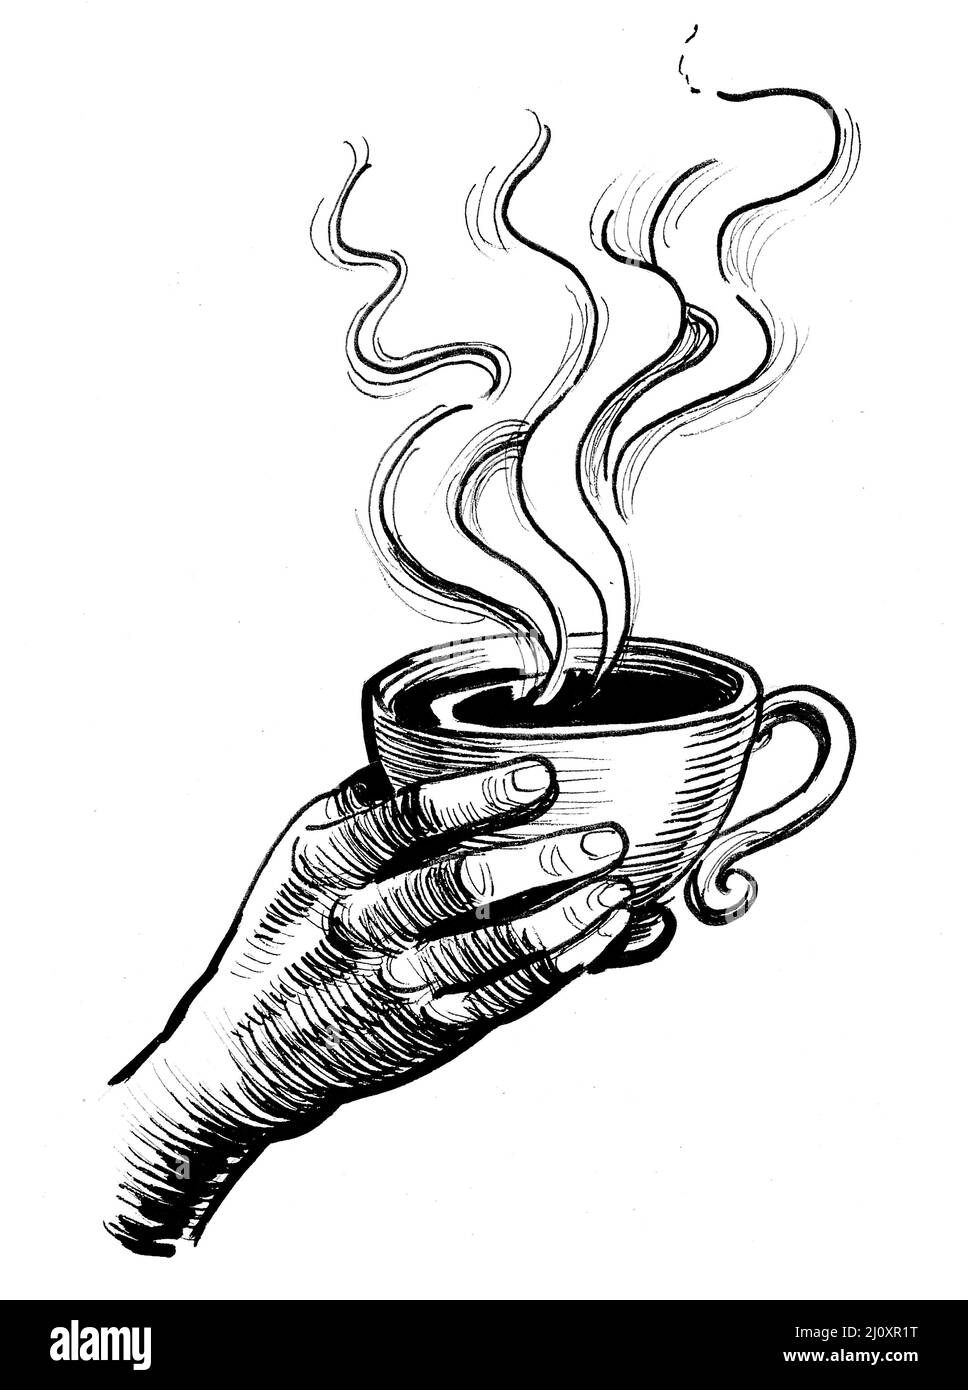 Hand with a cup of coffee. Ink black and white drawing of a hand holding a cup of coffee Stock Photo